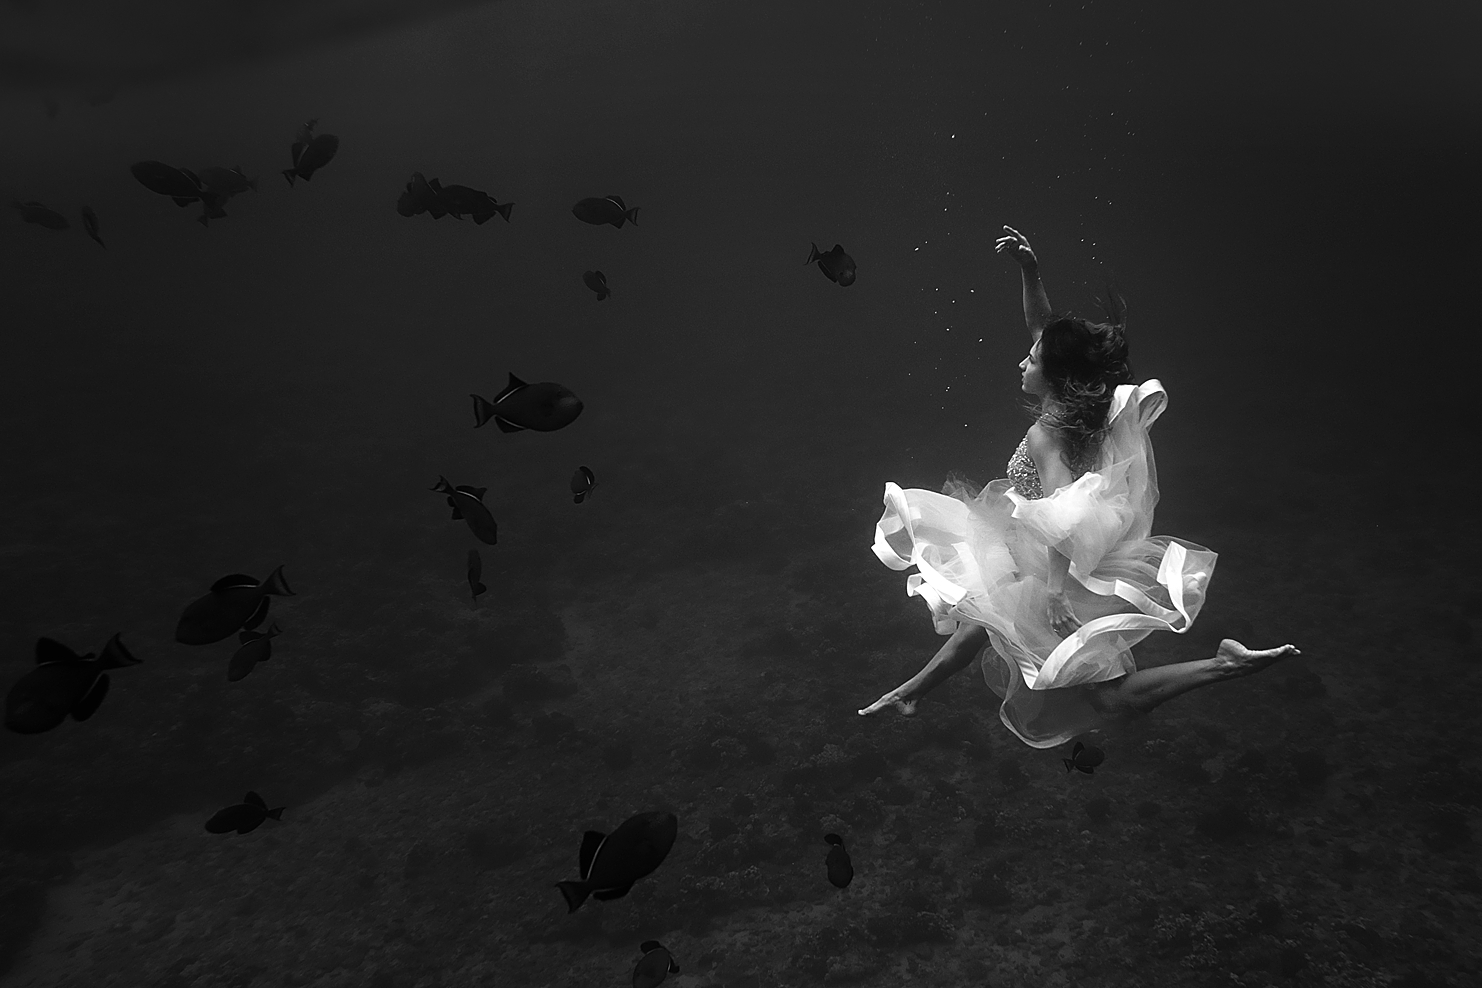 hawaii beach photoshoot idea - black and white underwater image of woman wearing fluffy white wedding dress with fishes in the background photographed in the waters off maui hawaii